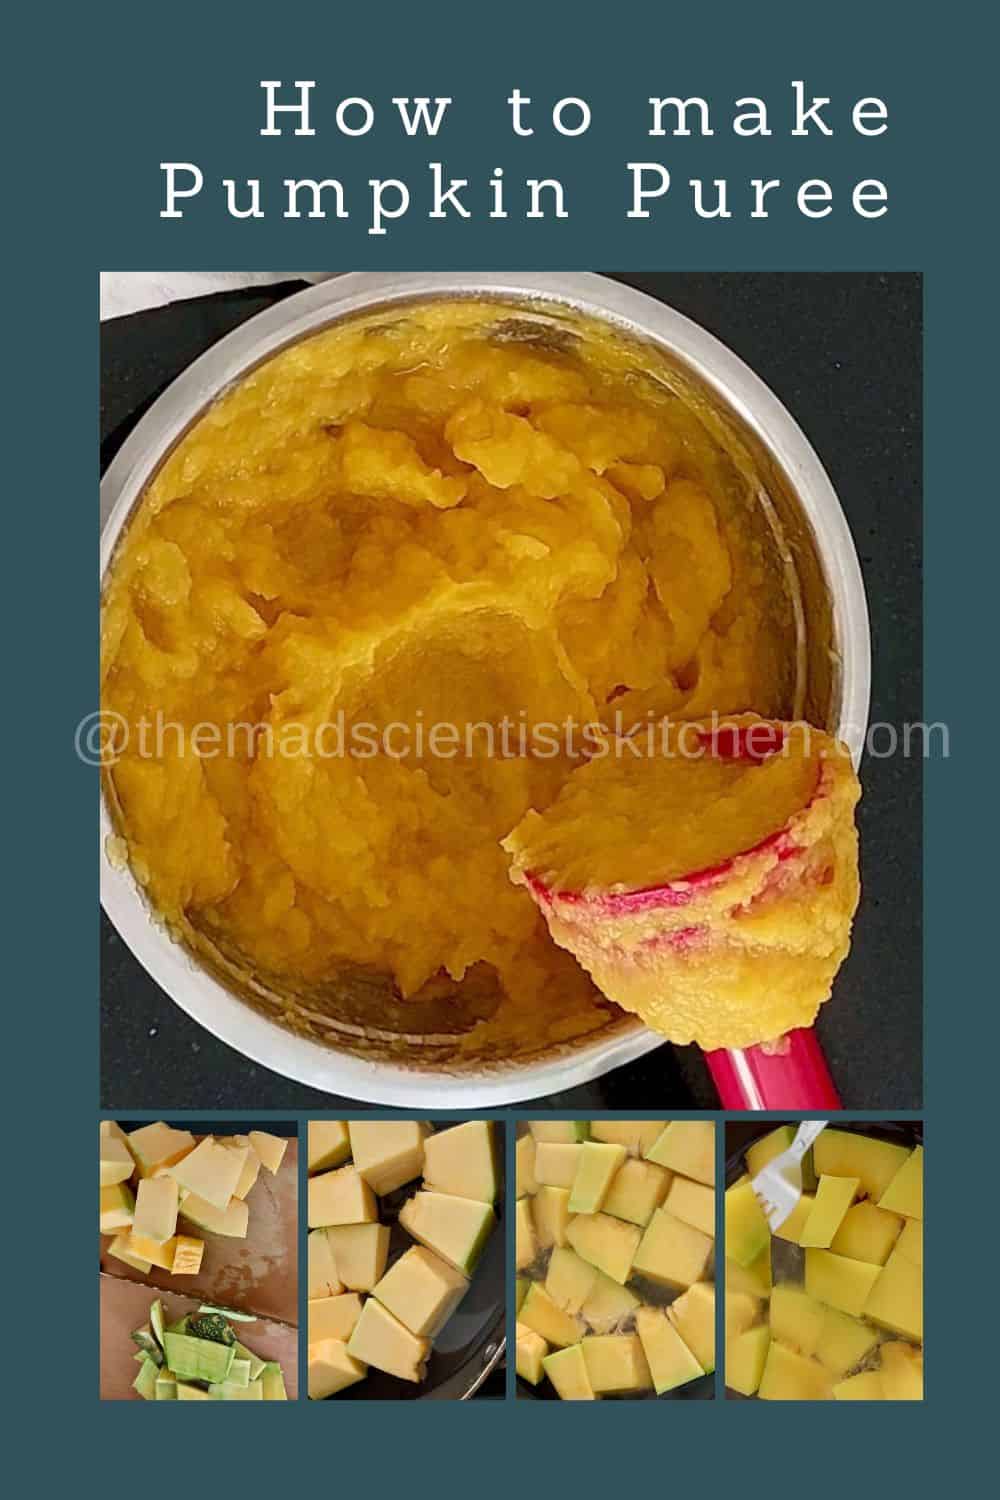 My easy way to Pumpkin Puree at home